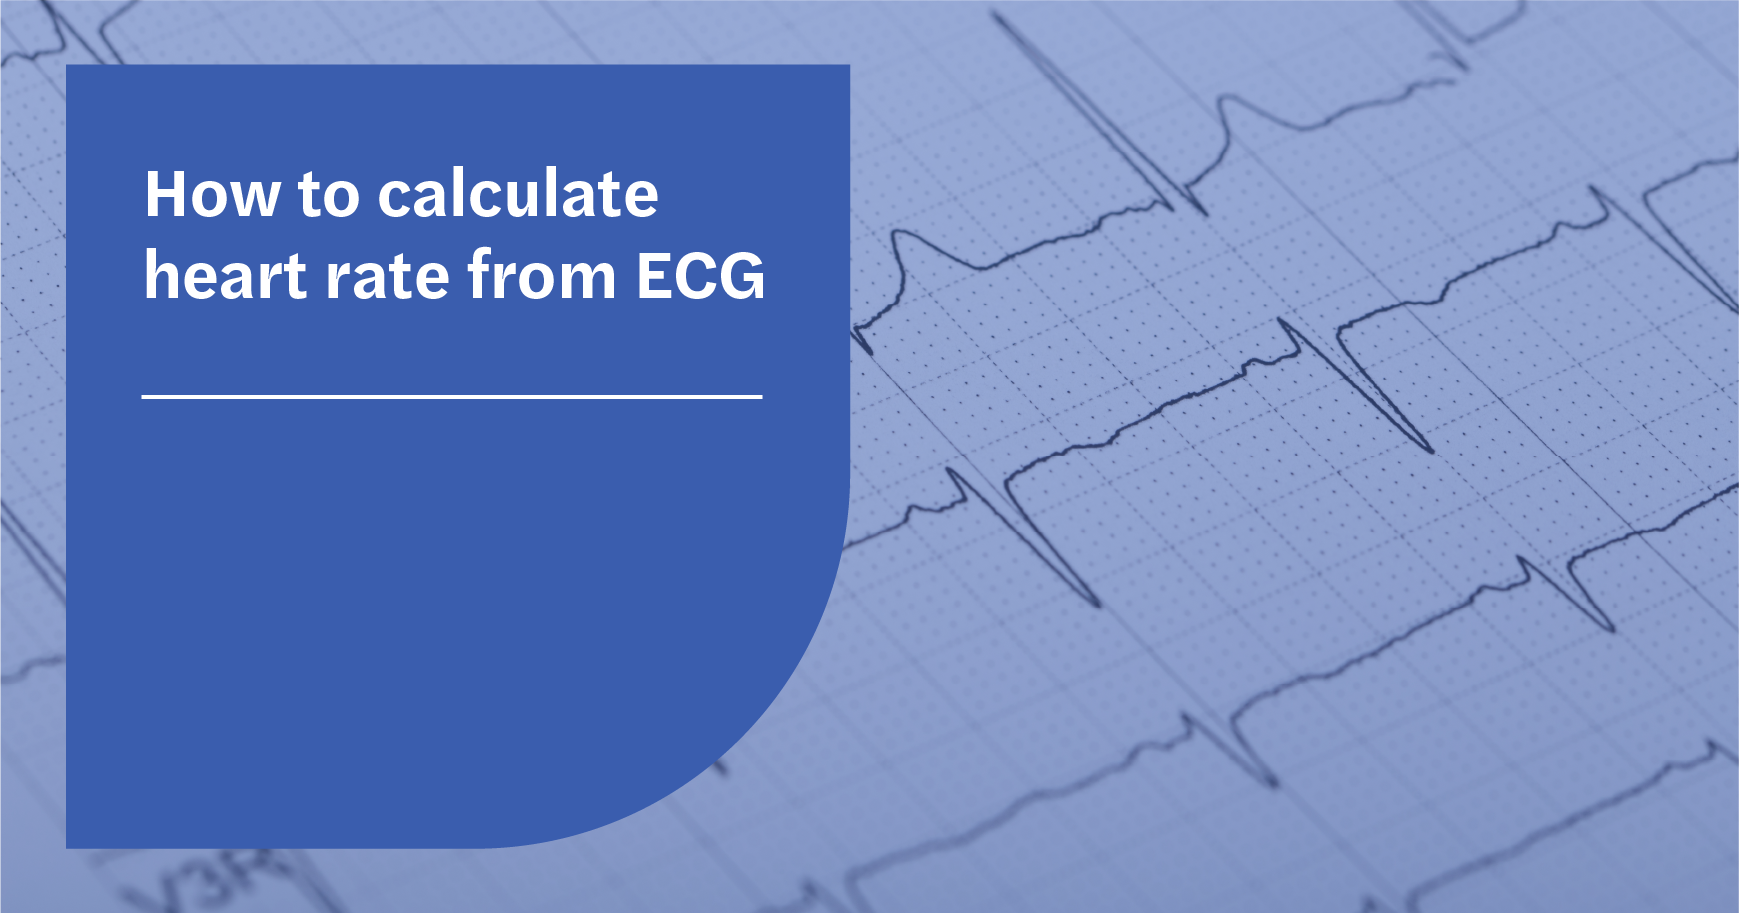 How to calculate heart rate from ECG (or EKG) - Seer Medical